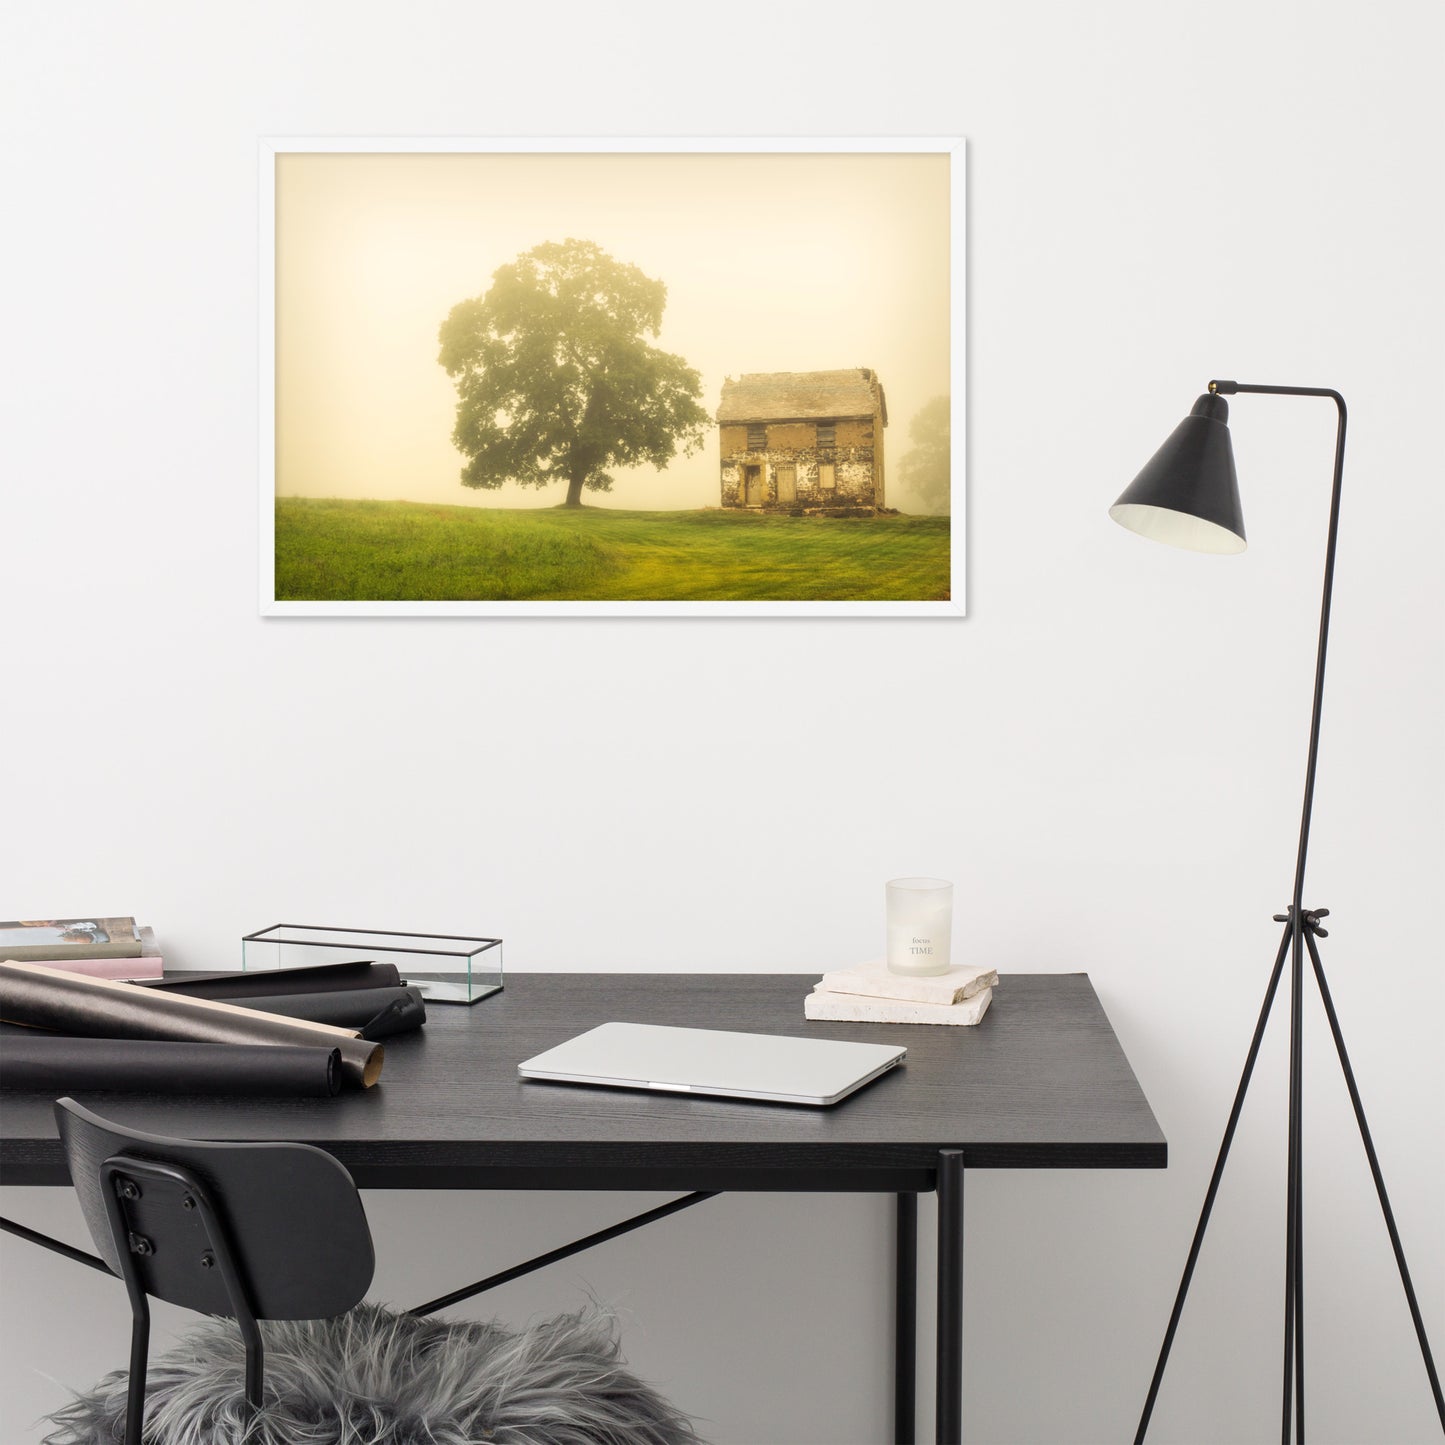 Office Room Art: Abandoned House - Rustic / Rural / Country Style Landscape / Nature Framed Photo Paper Wall Art Prints - Artwork - Wall Decor